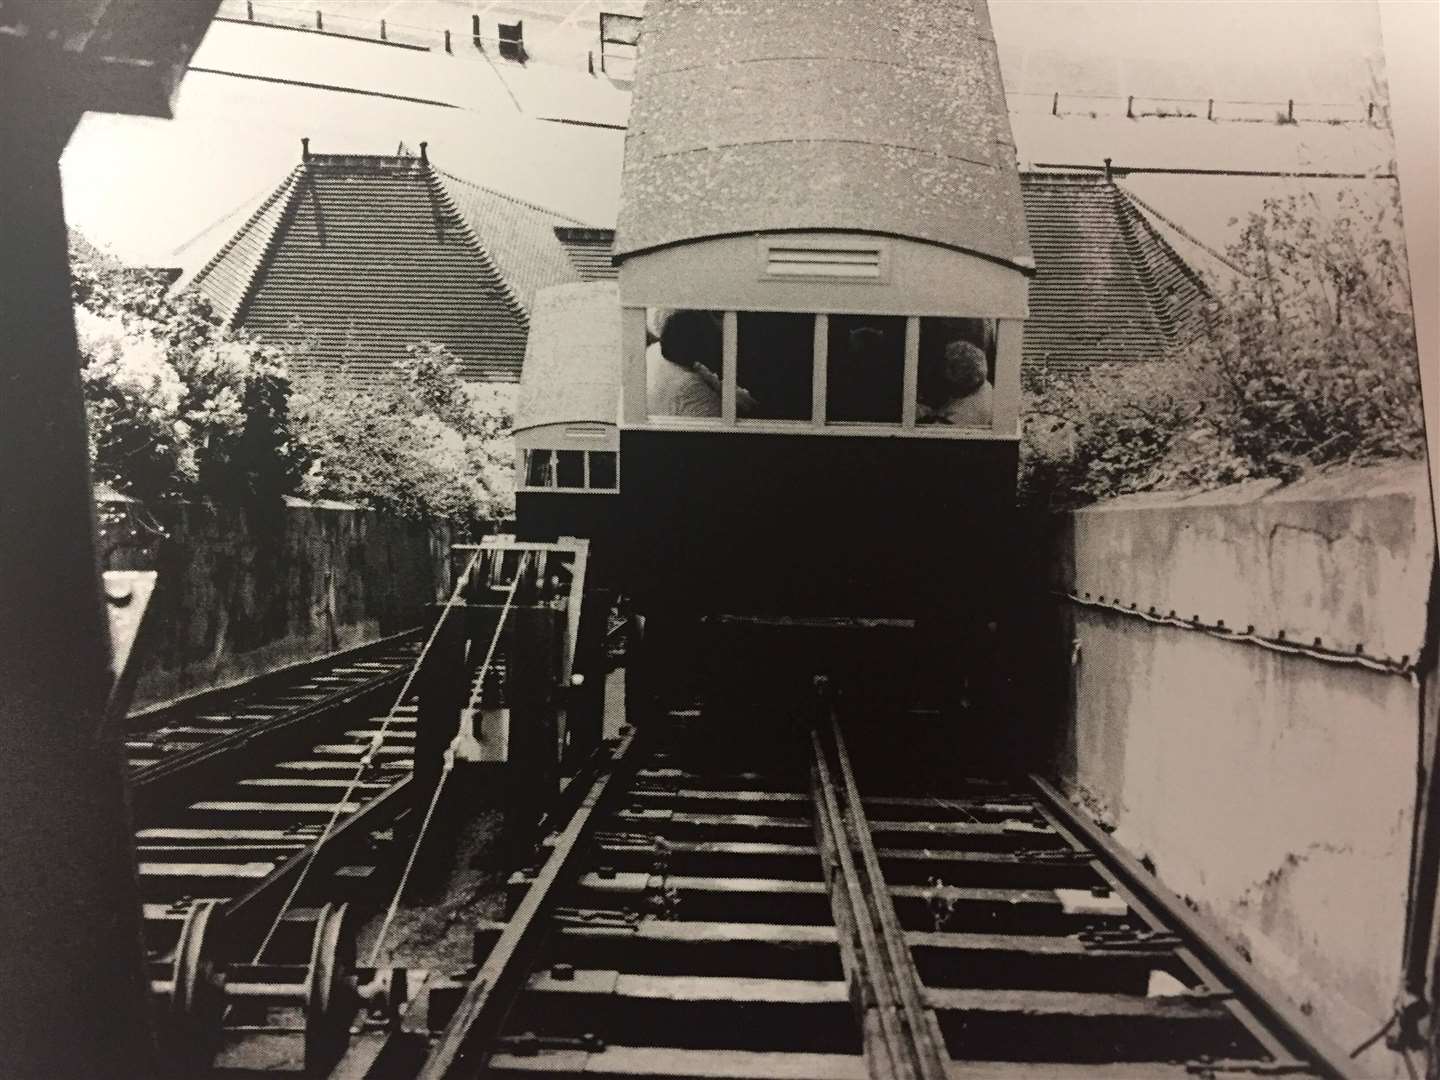 The Leas Lift while it was still operational. Photo: Ray Hollands